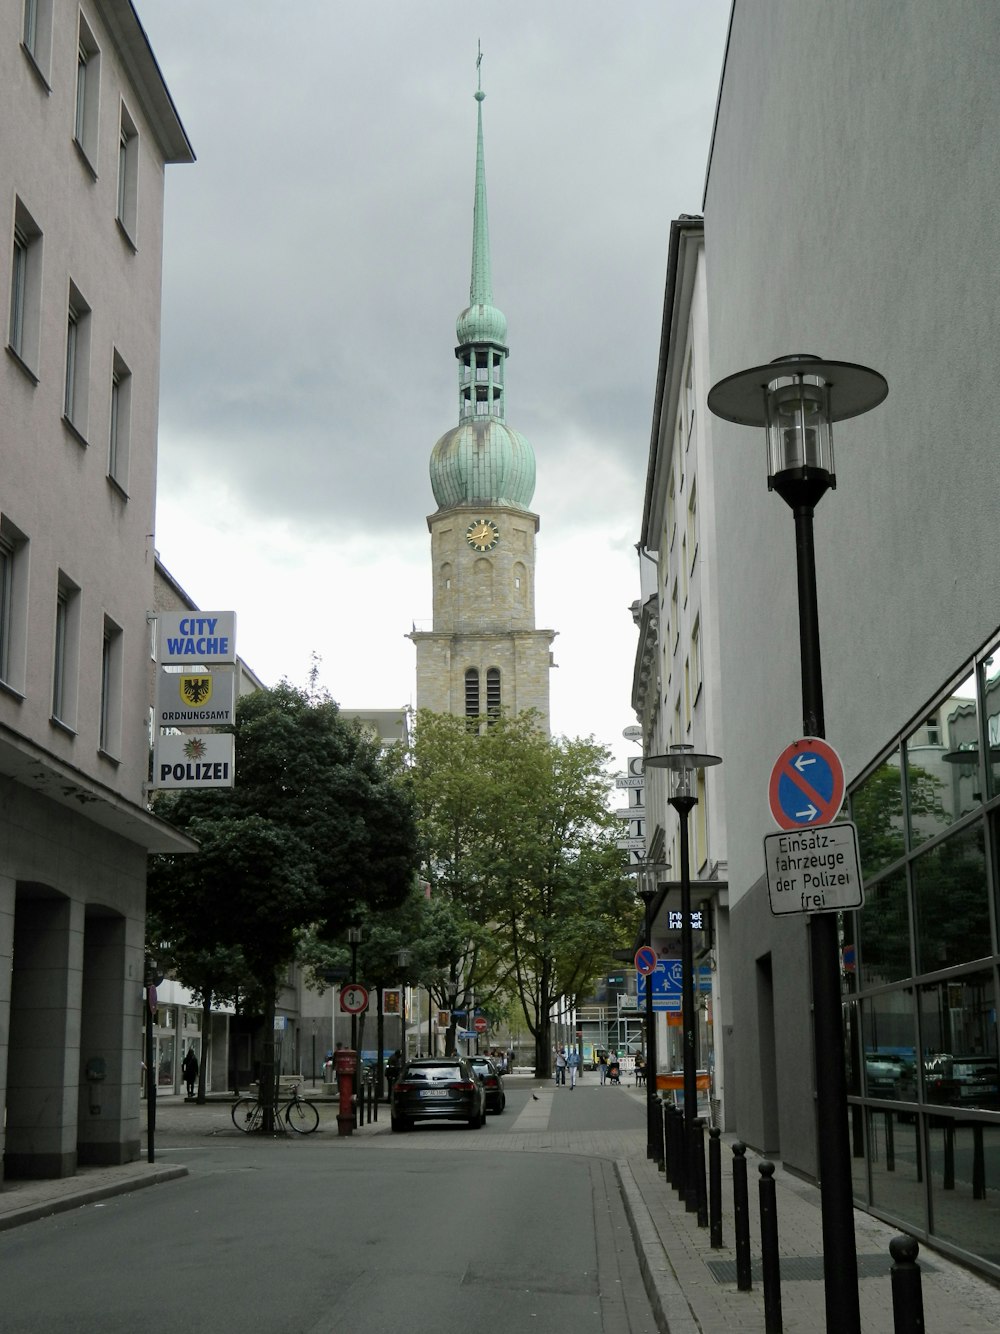 a clock tower towering over a city street